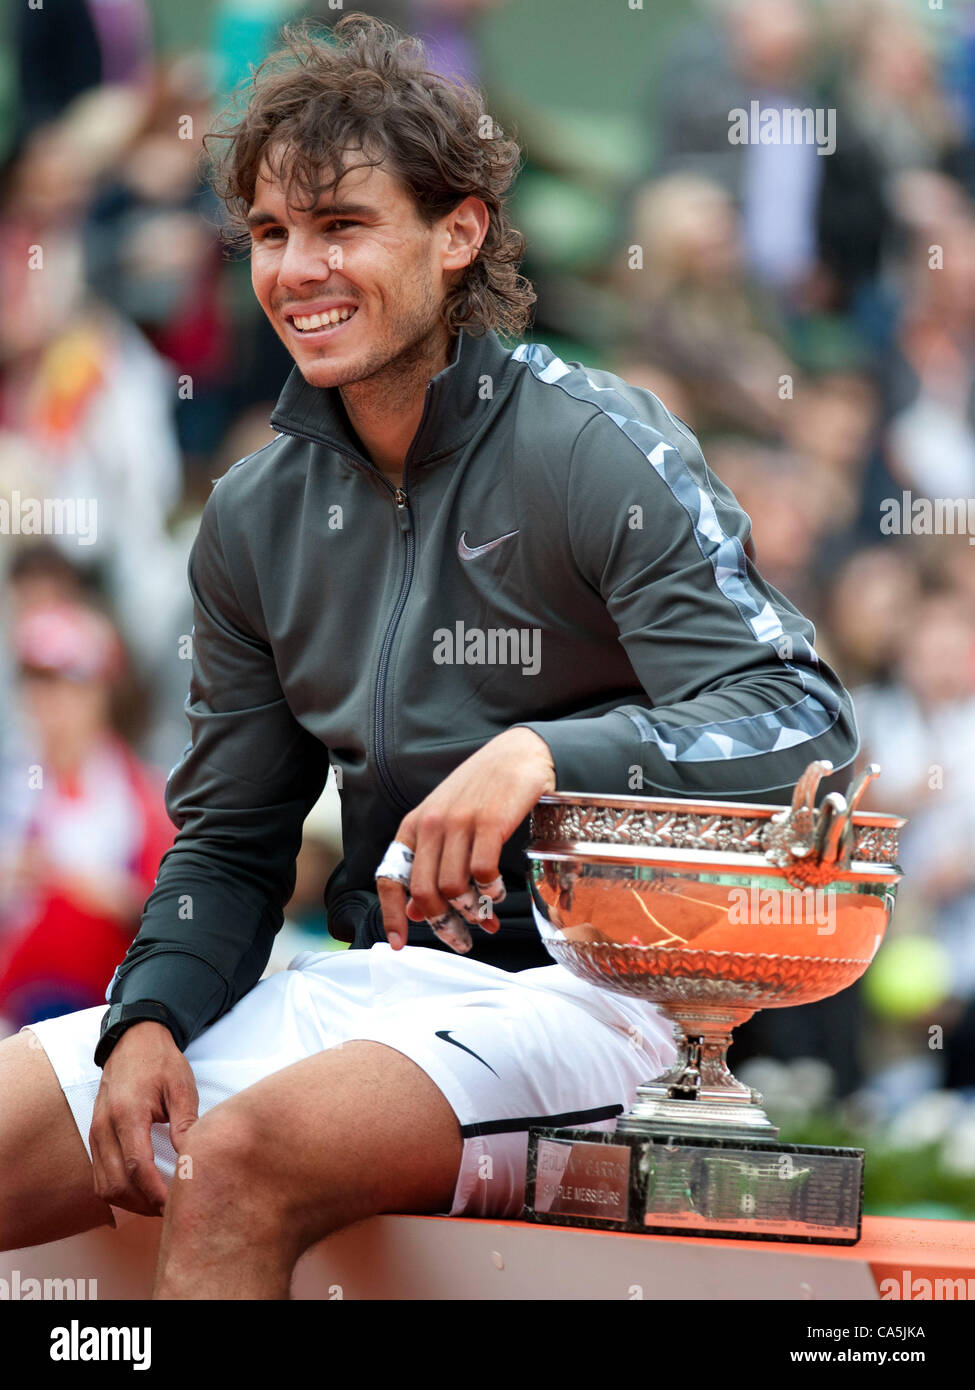 11.06.2012. Roland garros, Paris, France. Rafael Nadal of Spain with the French  Open Men's Champions trophy after Nadal defeated Serbia's Novak Djokovic in  the final of the French Open, played at Stade